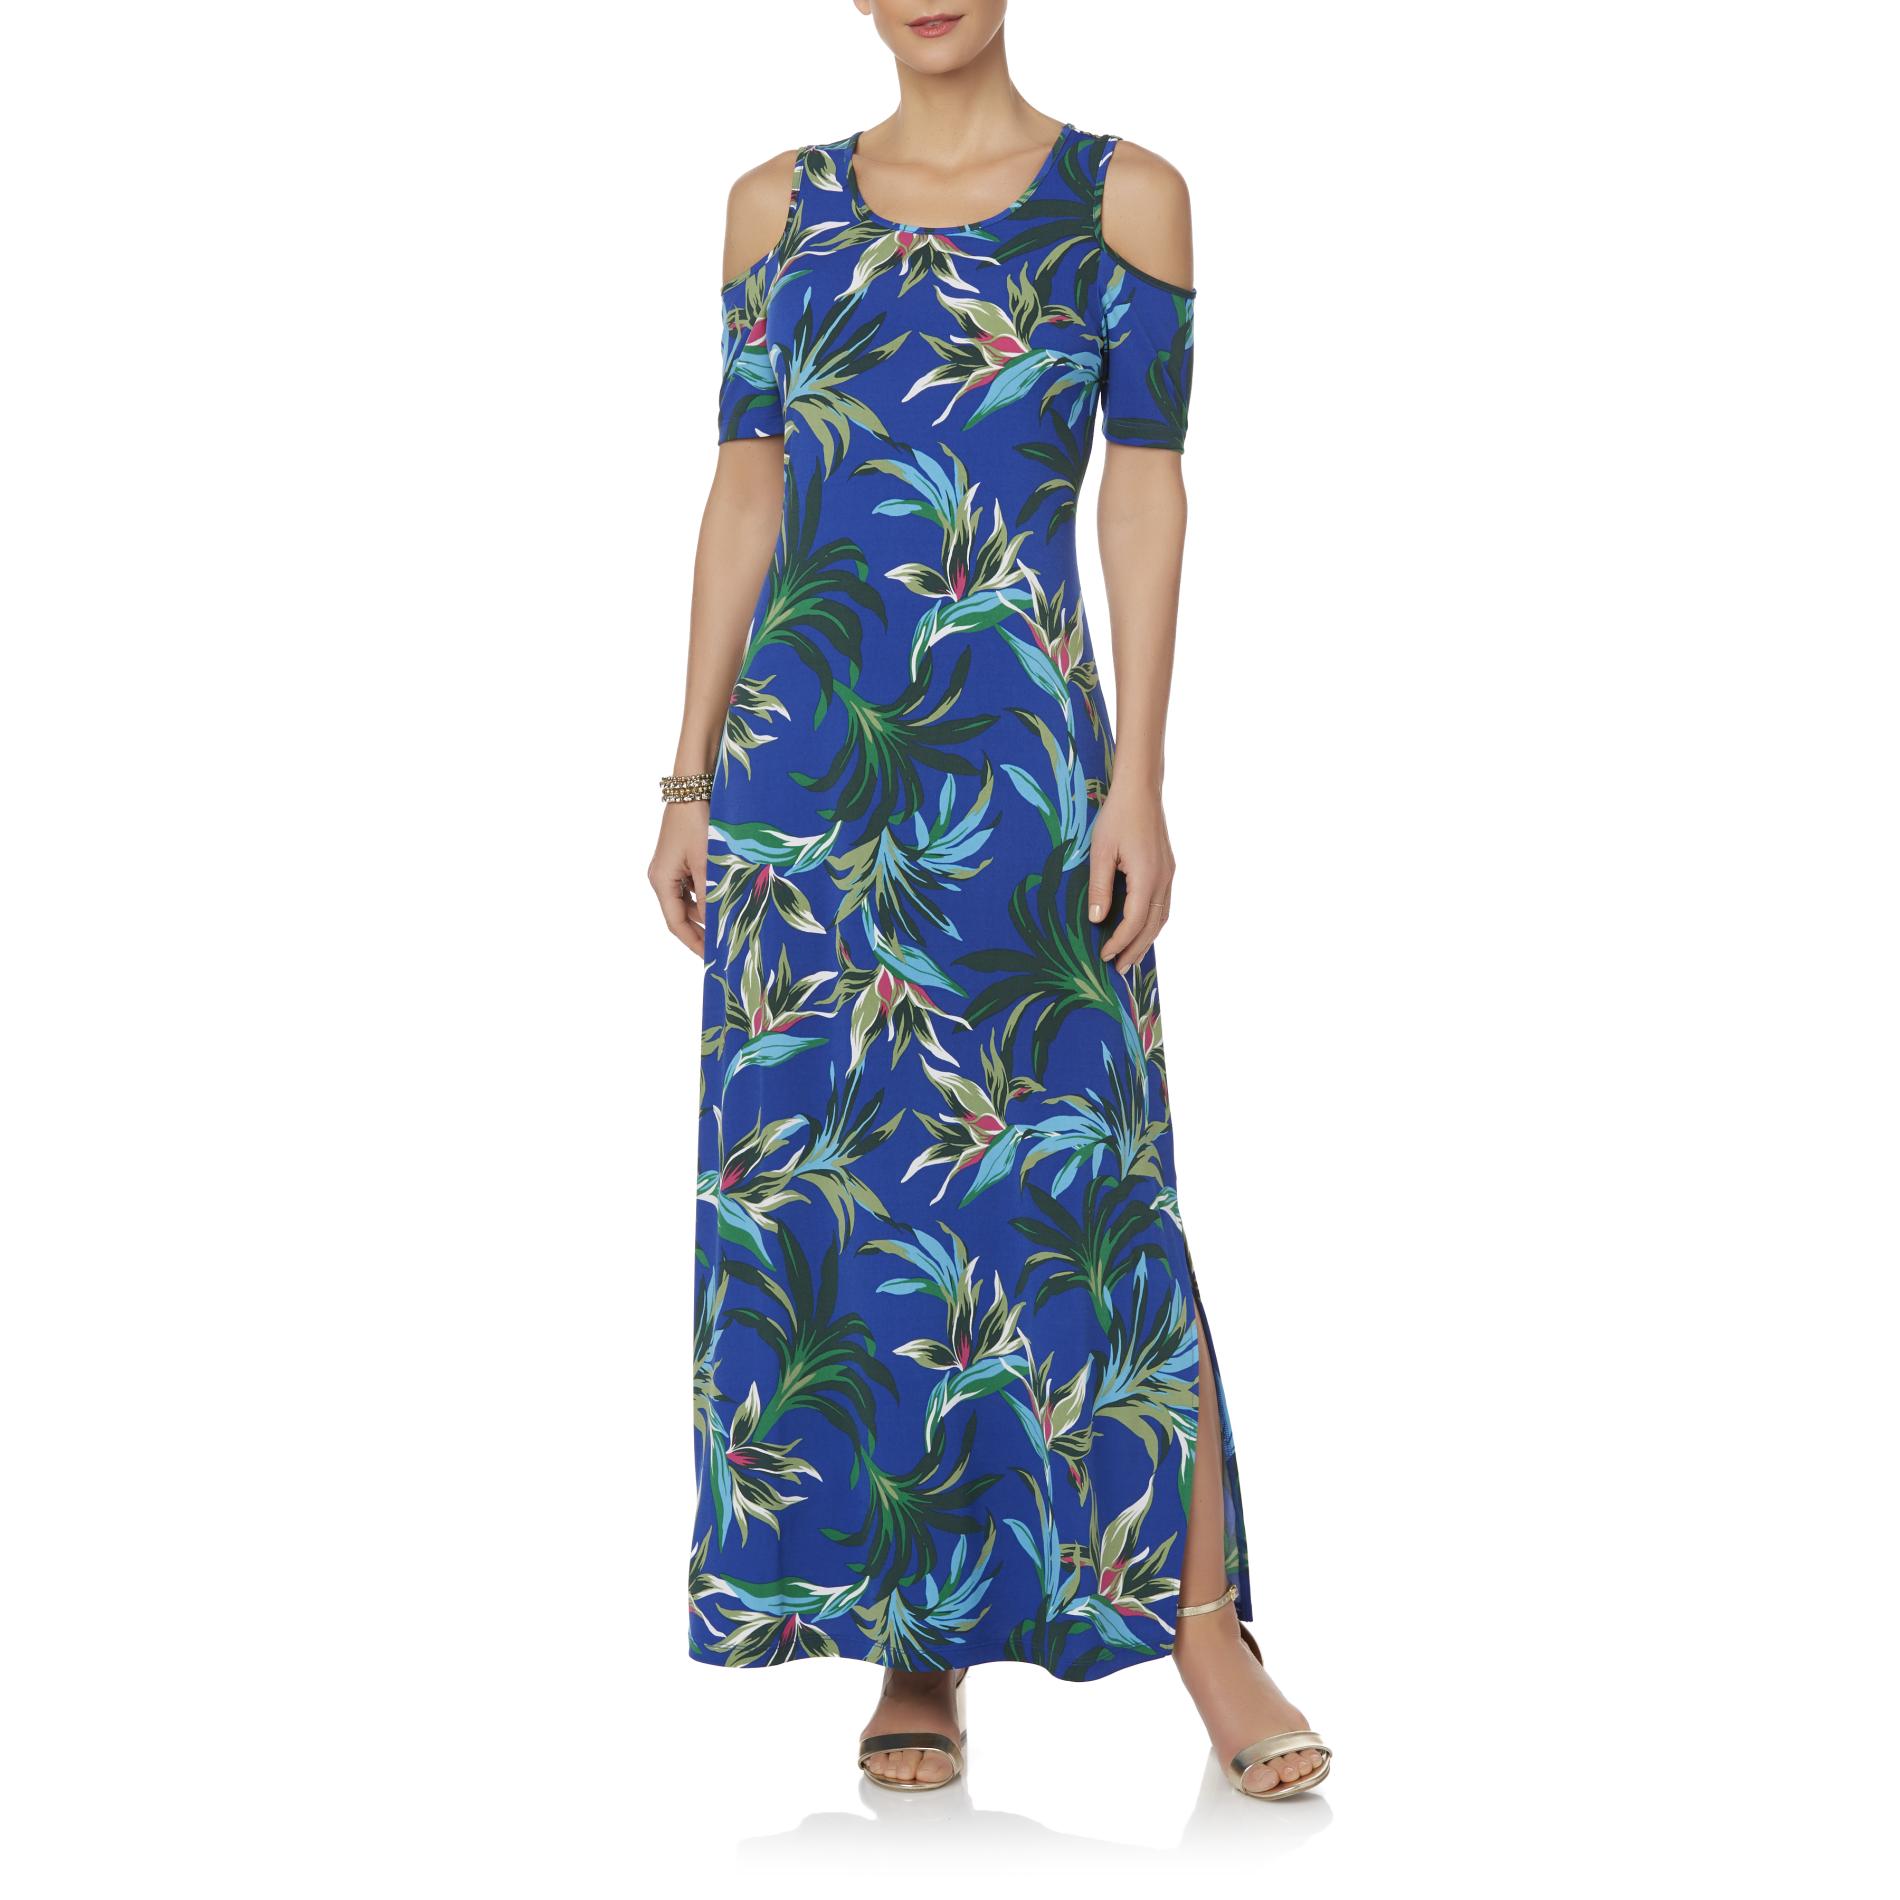 Jaclyn Smith Women's Cold Shoulder Maxi Dress - Tropical